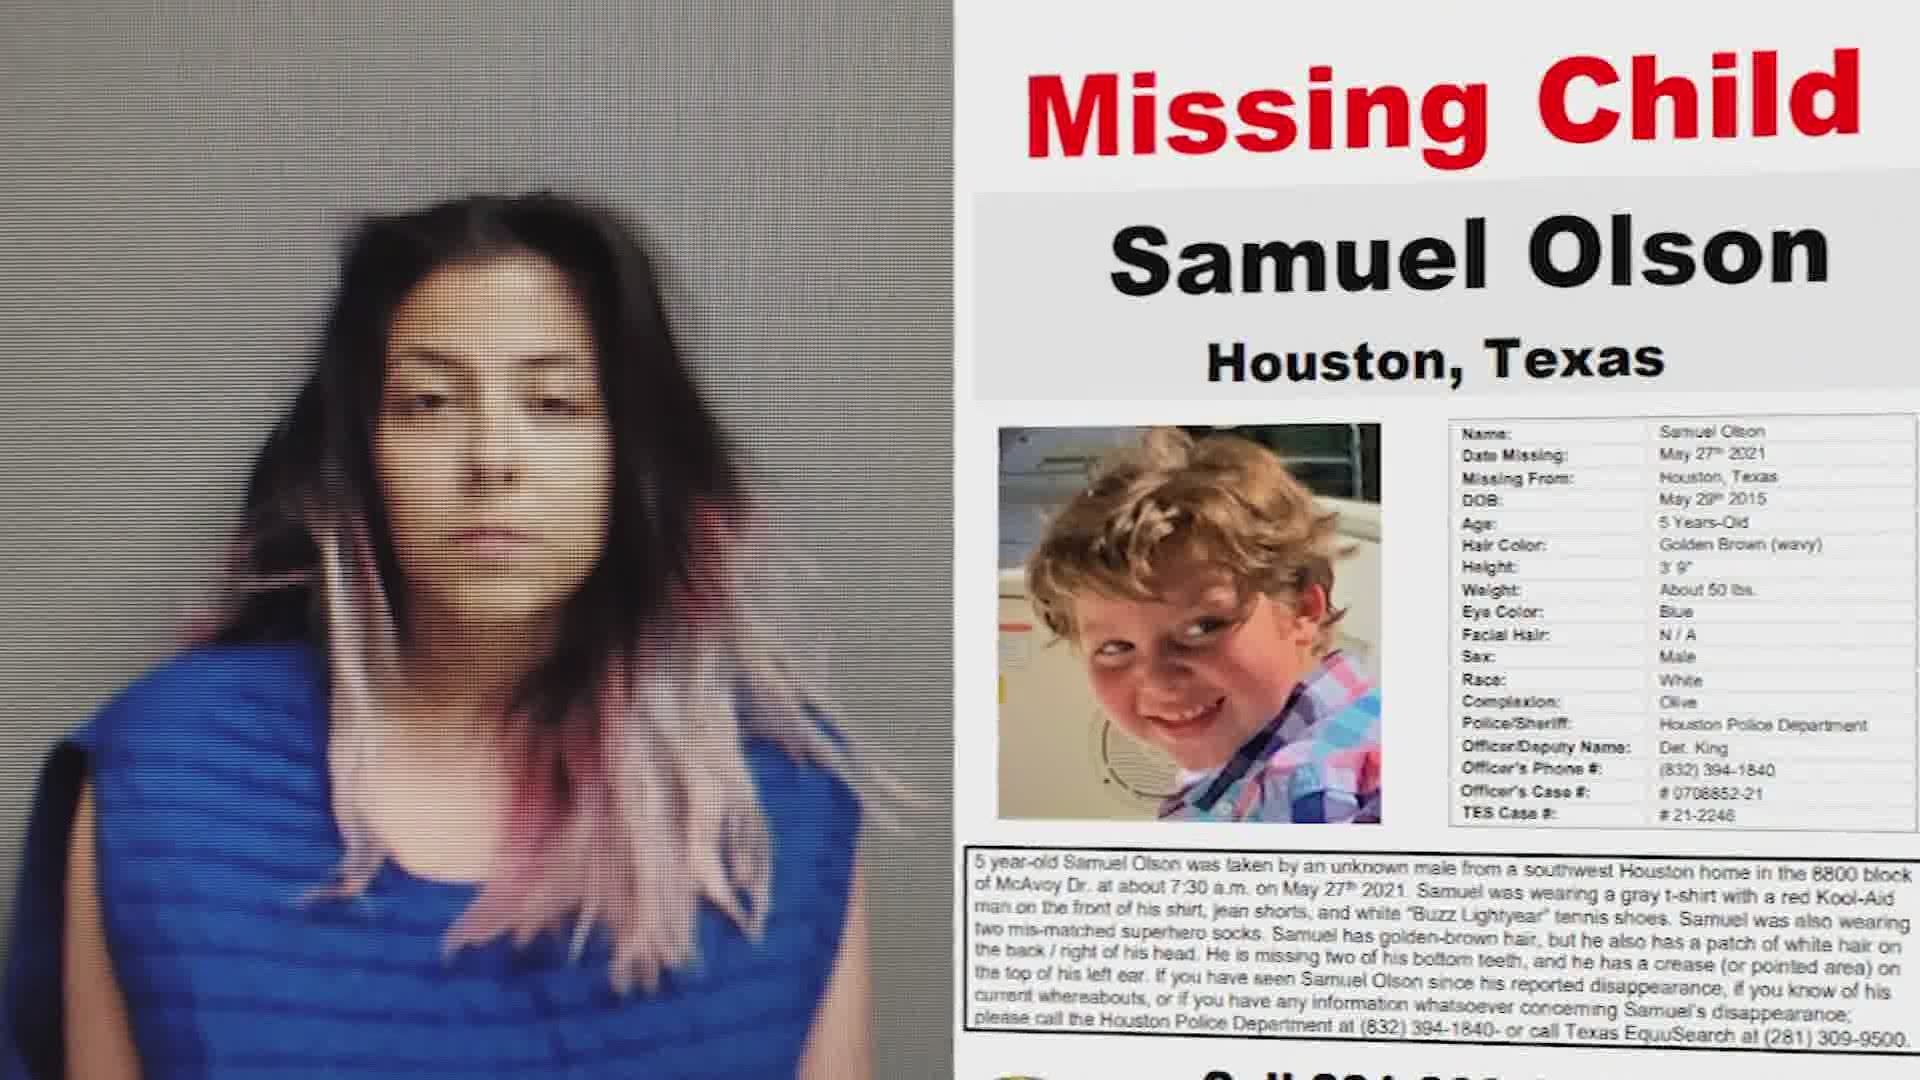 Houston police say they were able to locate the child’s body at a motel in Jasper thanks to a tip that came in after hours at Crime Stoppers of Houston.